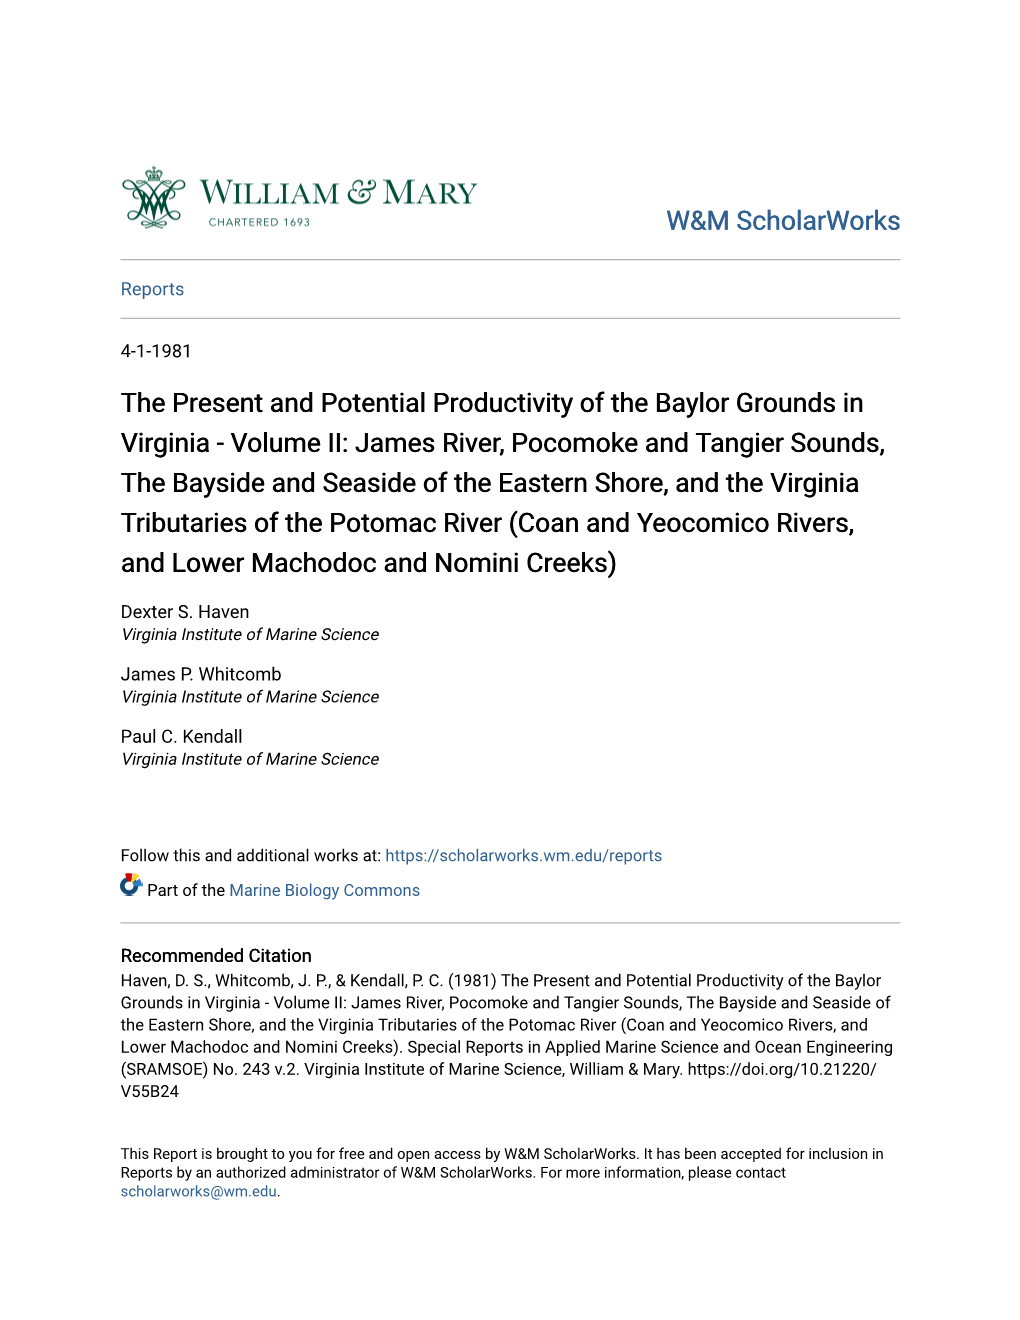 The Present and Potential Productivity of the Baylor Grounds in Virginia